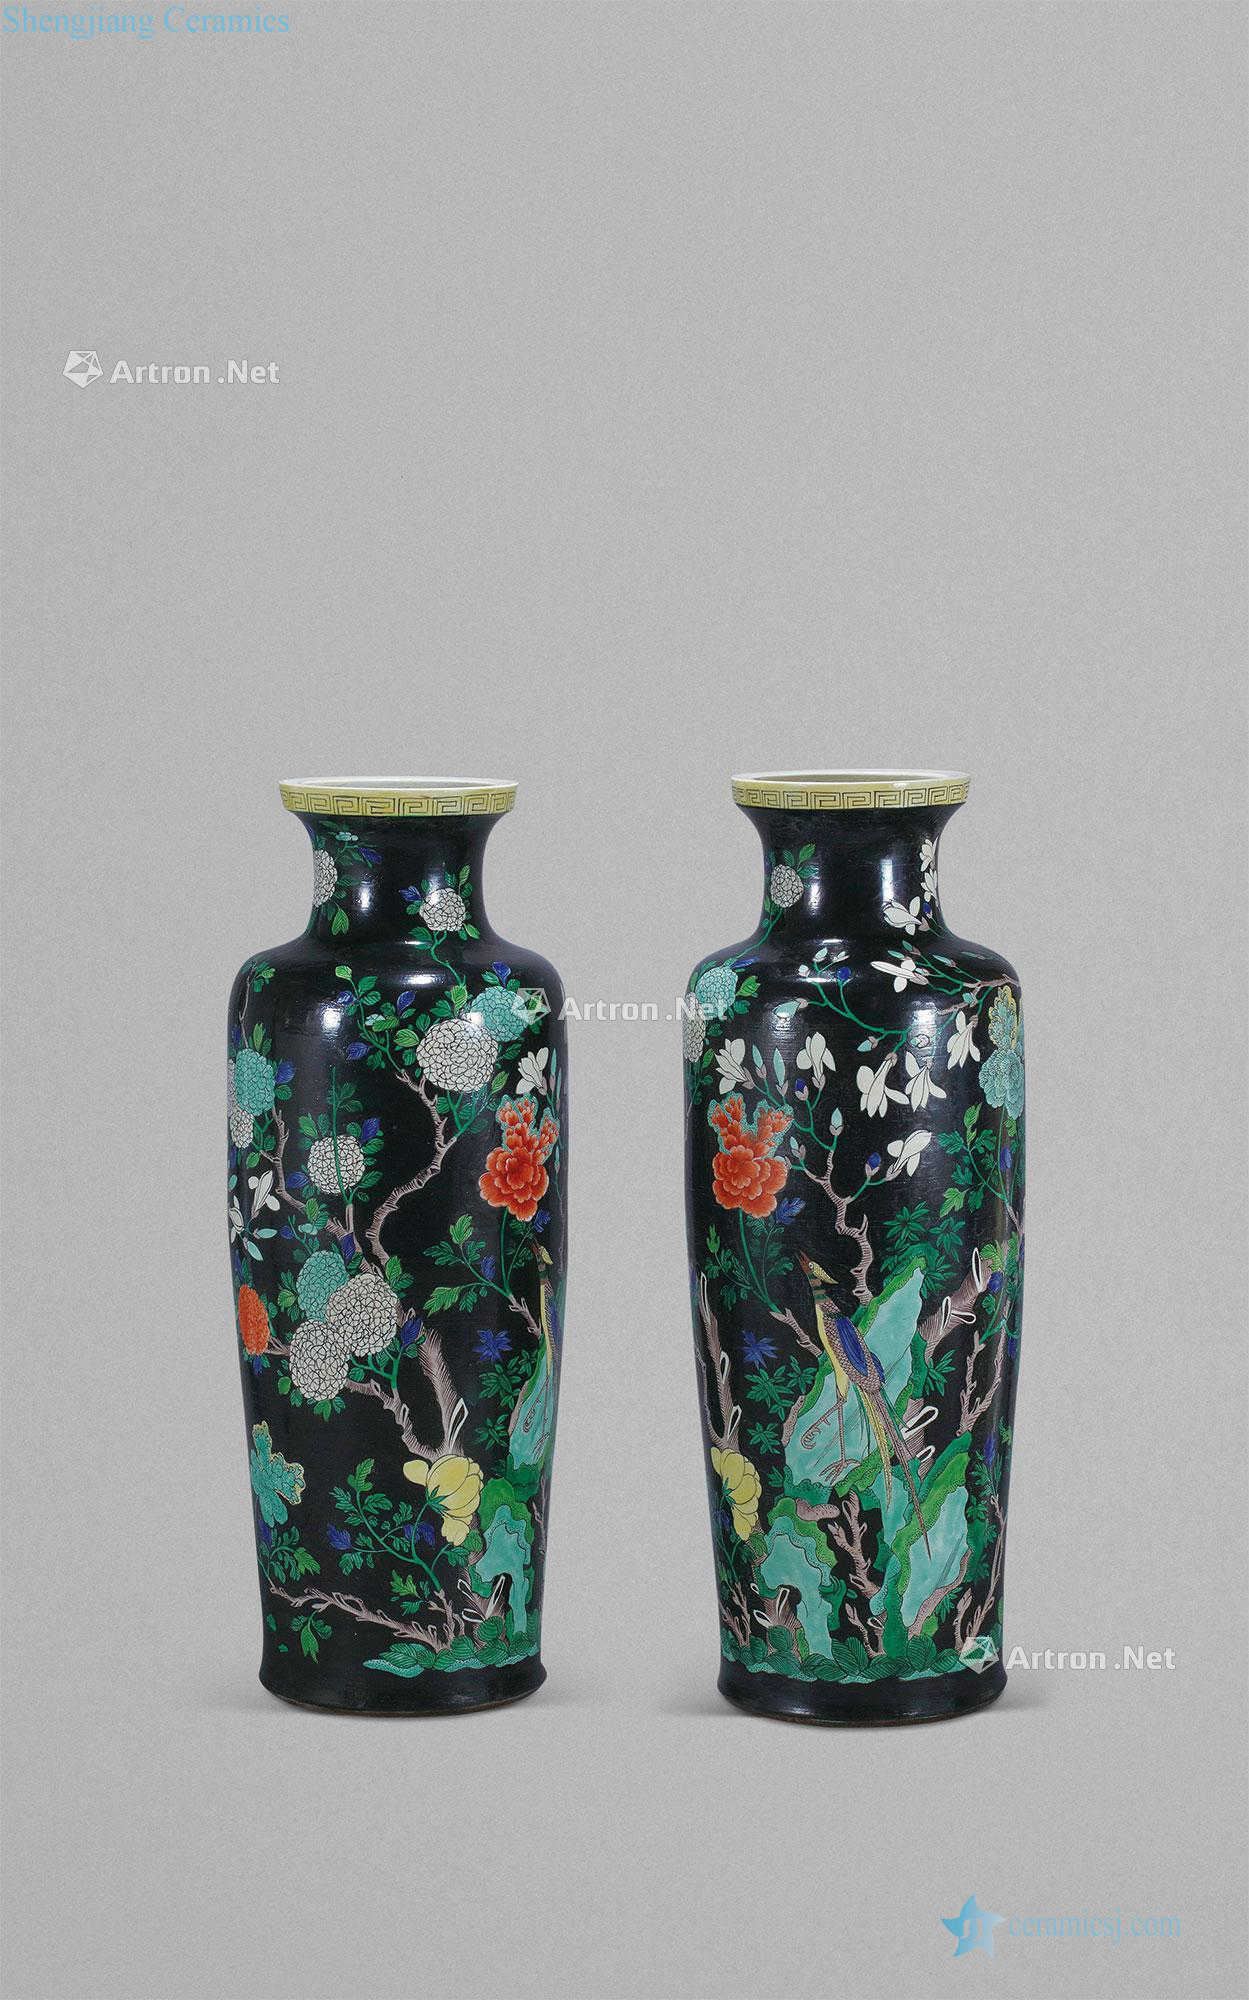 Black ink colorful flowers and birds in grain bottle (a)